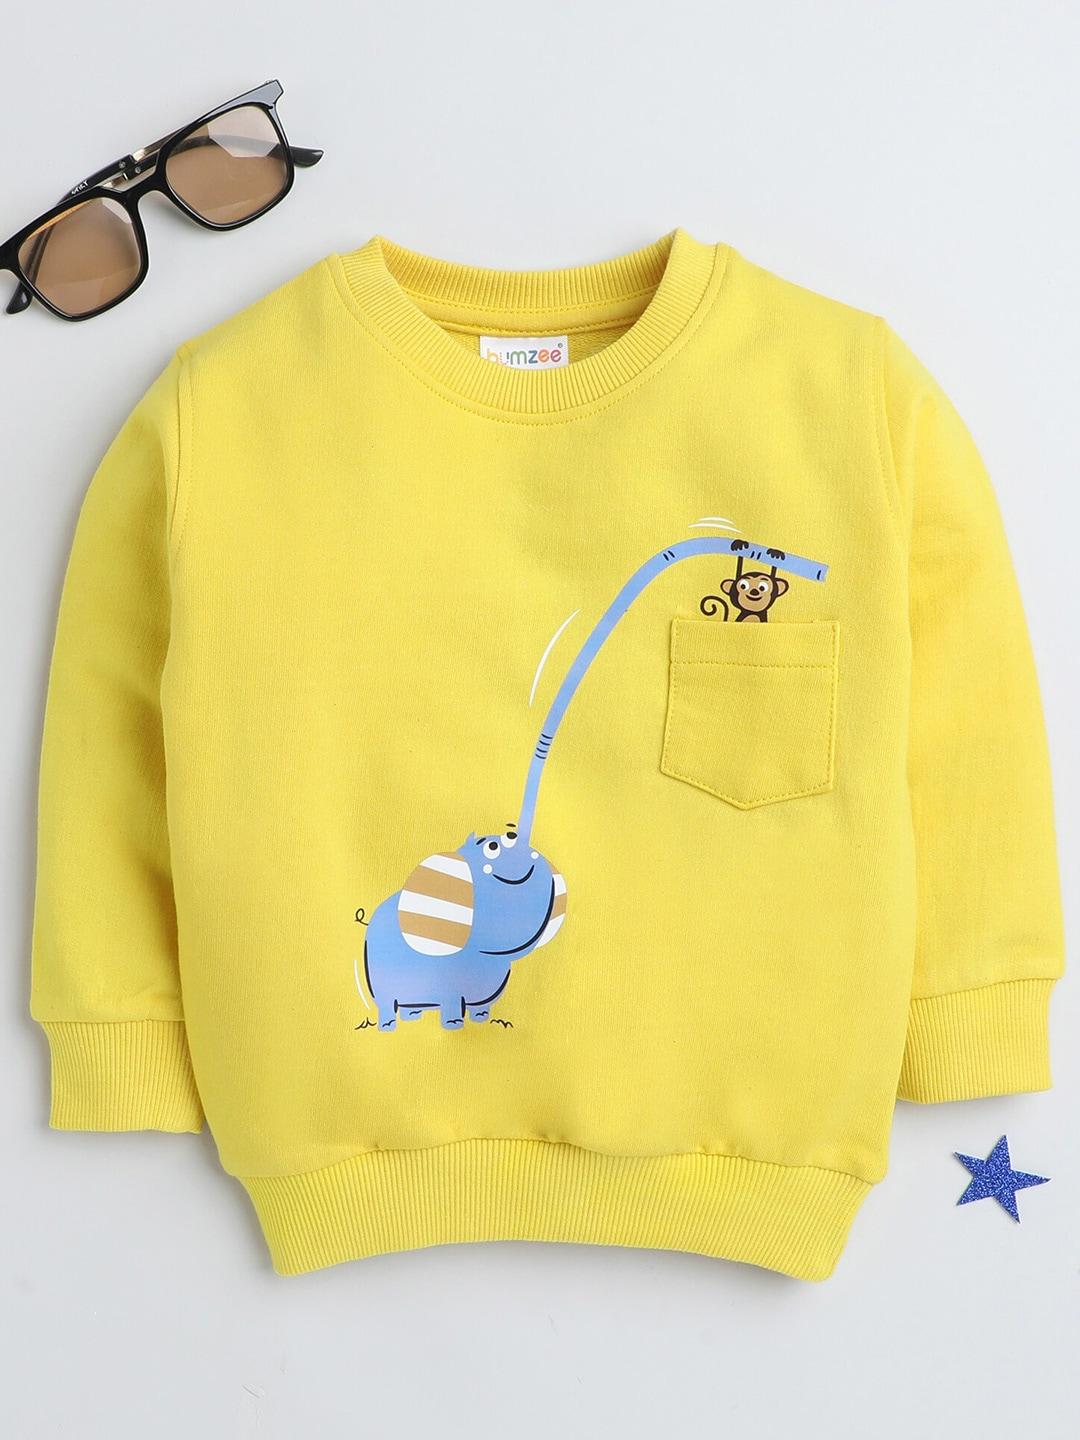 BUMZEE Infant Boys Graphic Printed Cotton Pullover